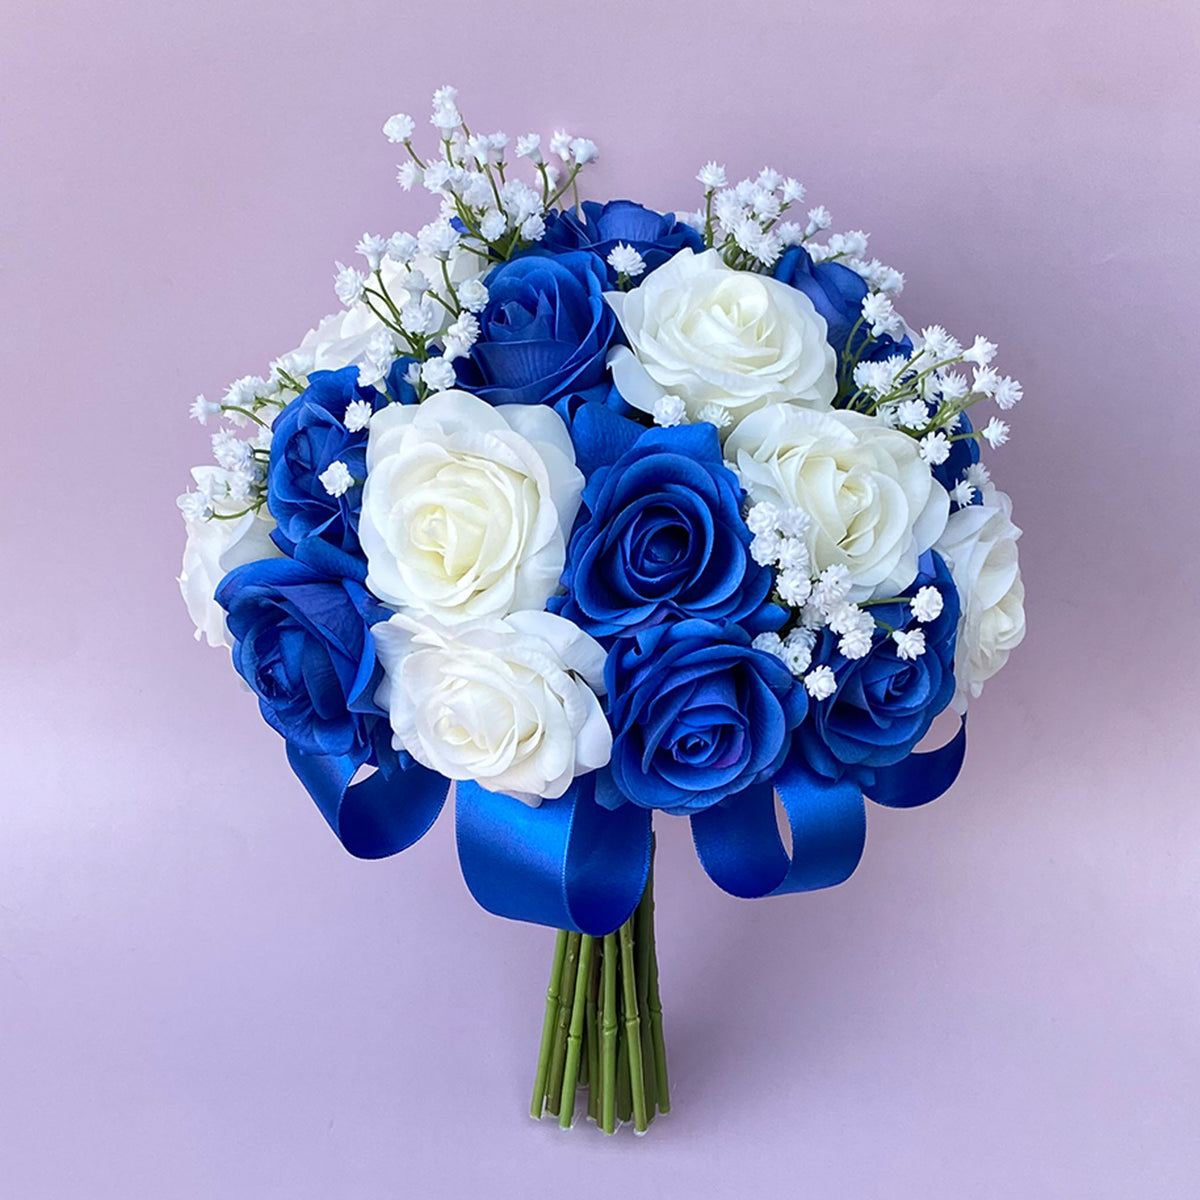 Real Touch Roses Bridal Wedding Bouquets Blue and White - VANRINA